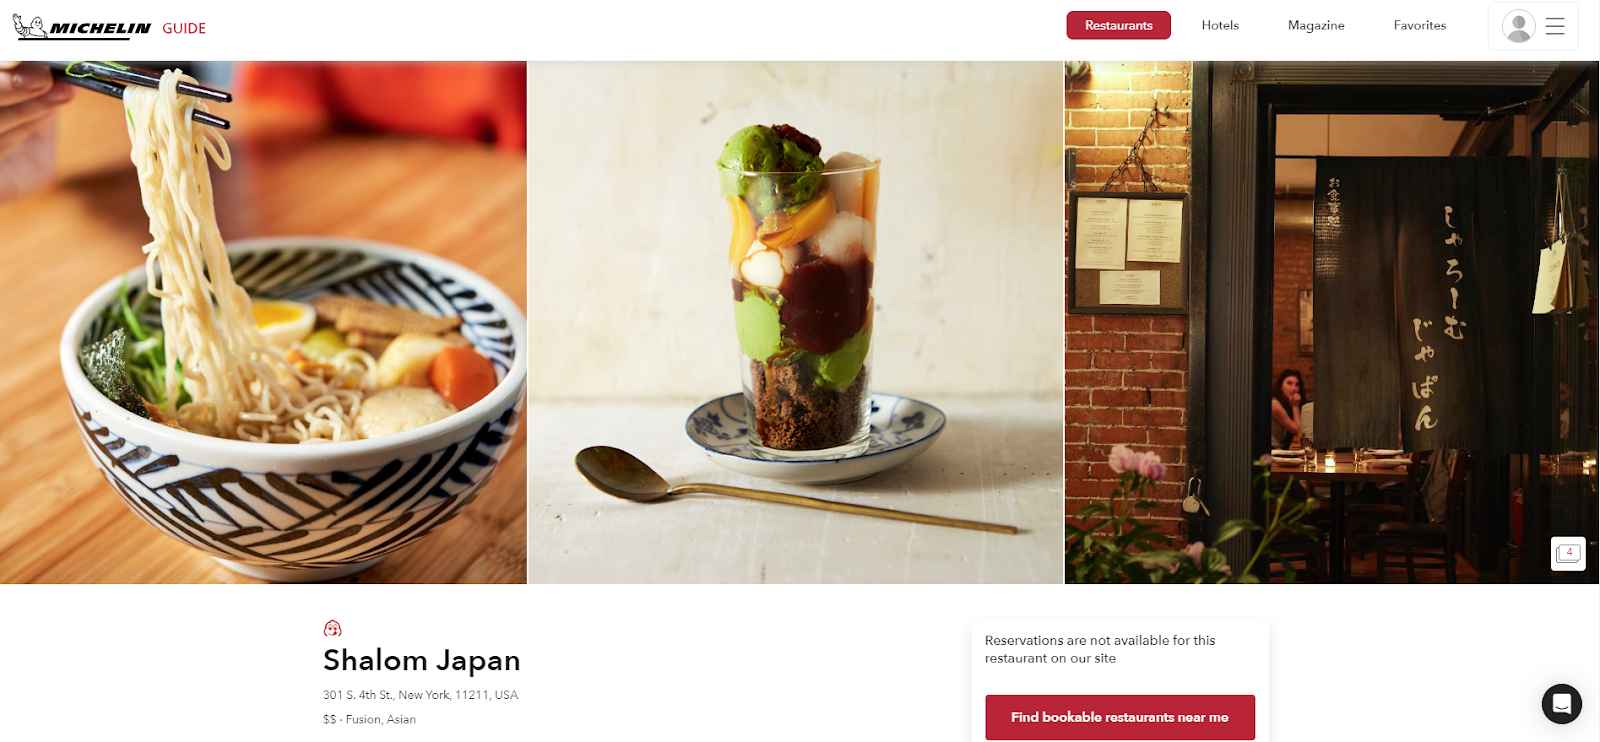 Images from Shalom Japan restaurant showing the location and food.